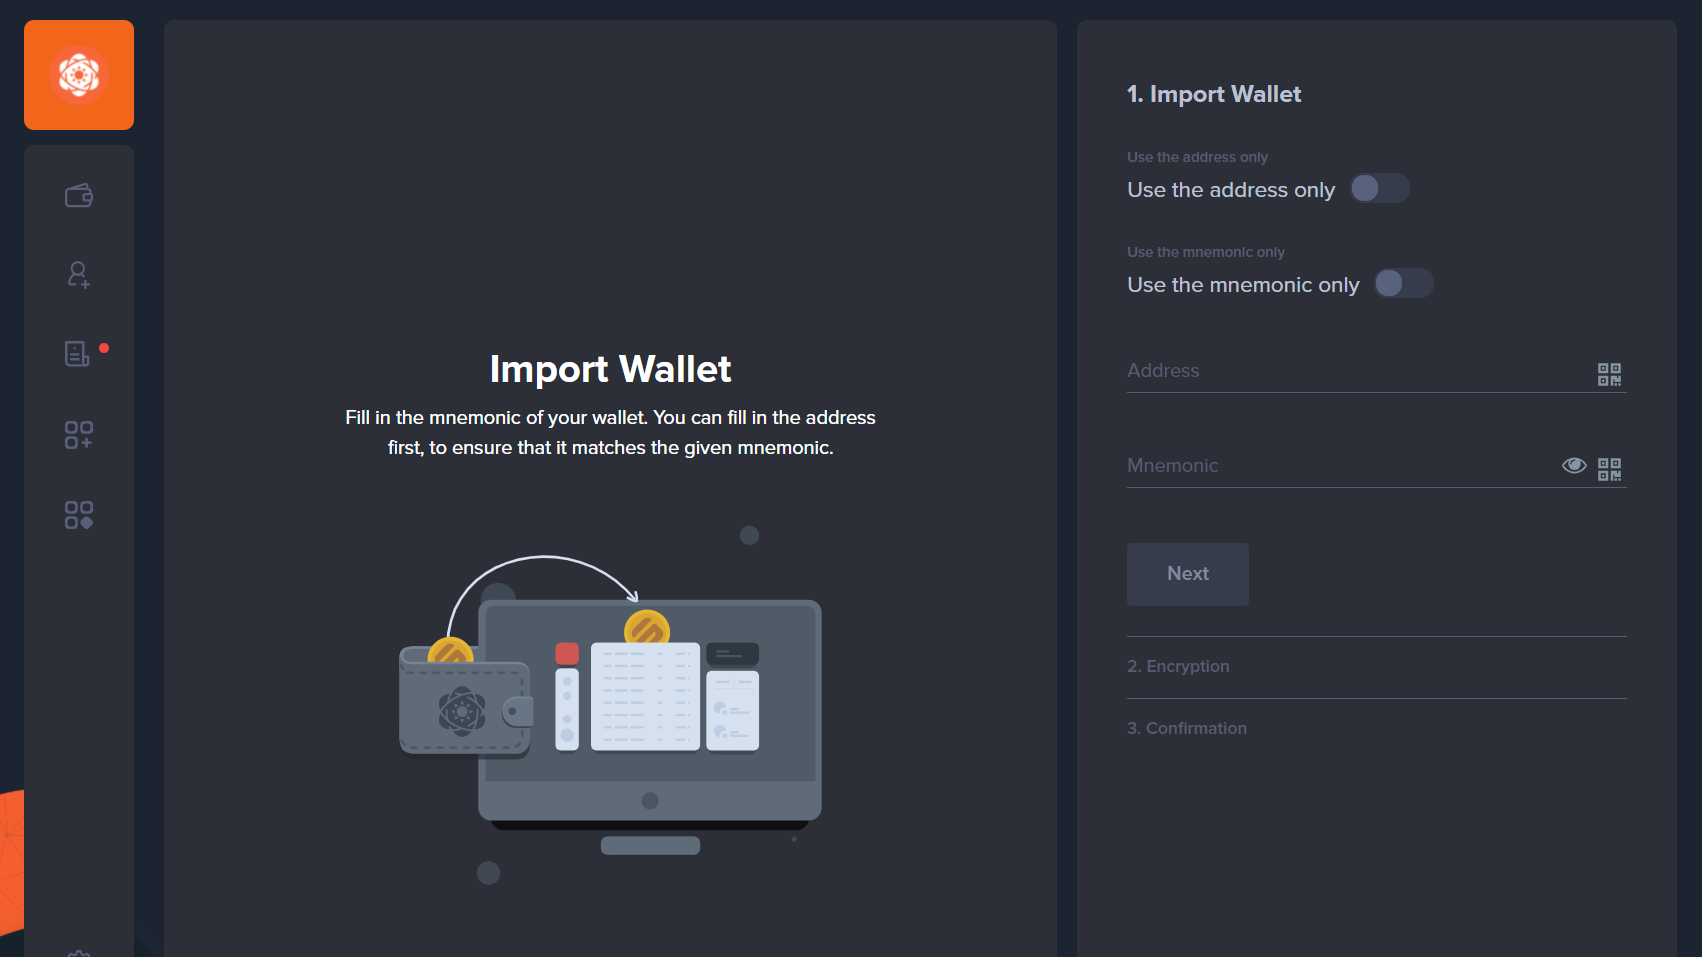 Import your wallet by providing its address, mnemonic, or both